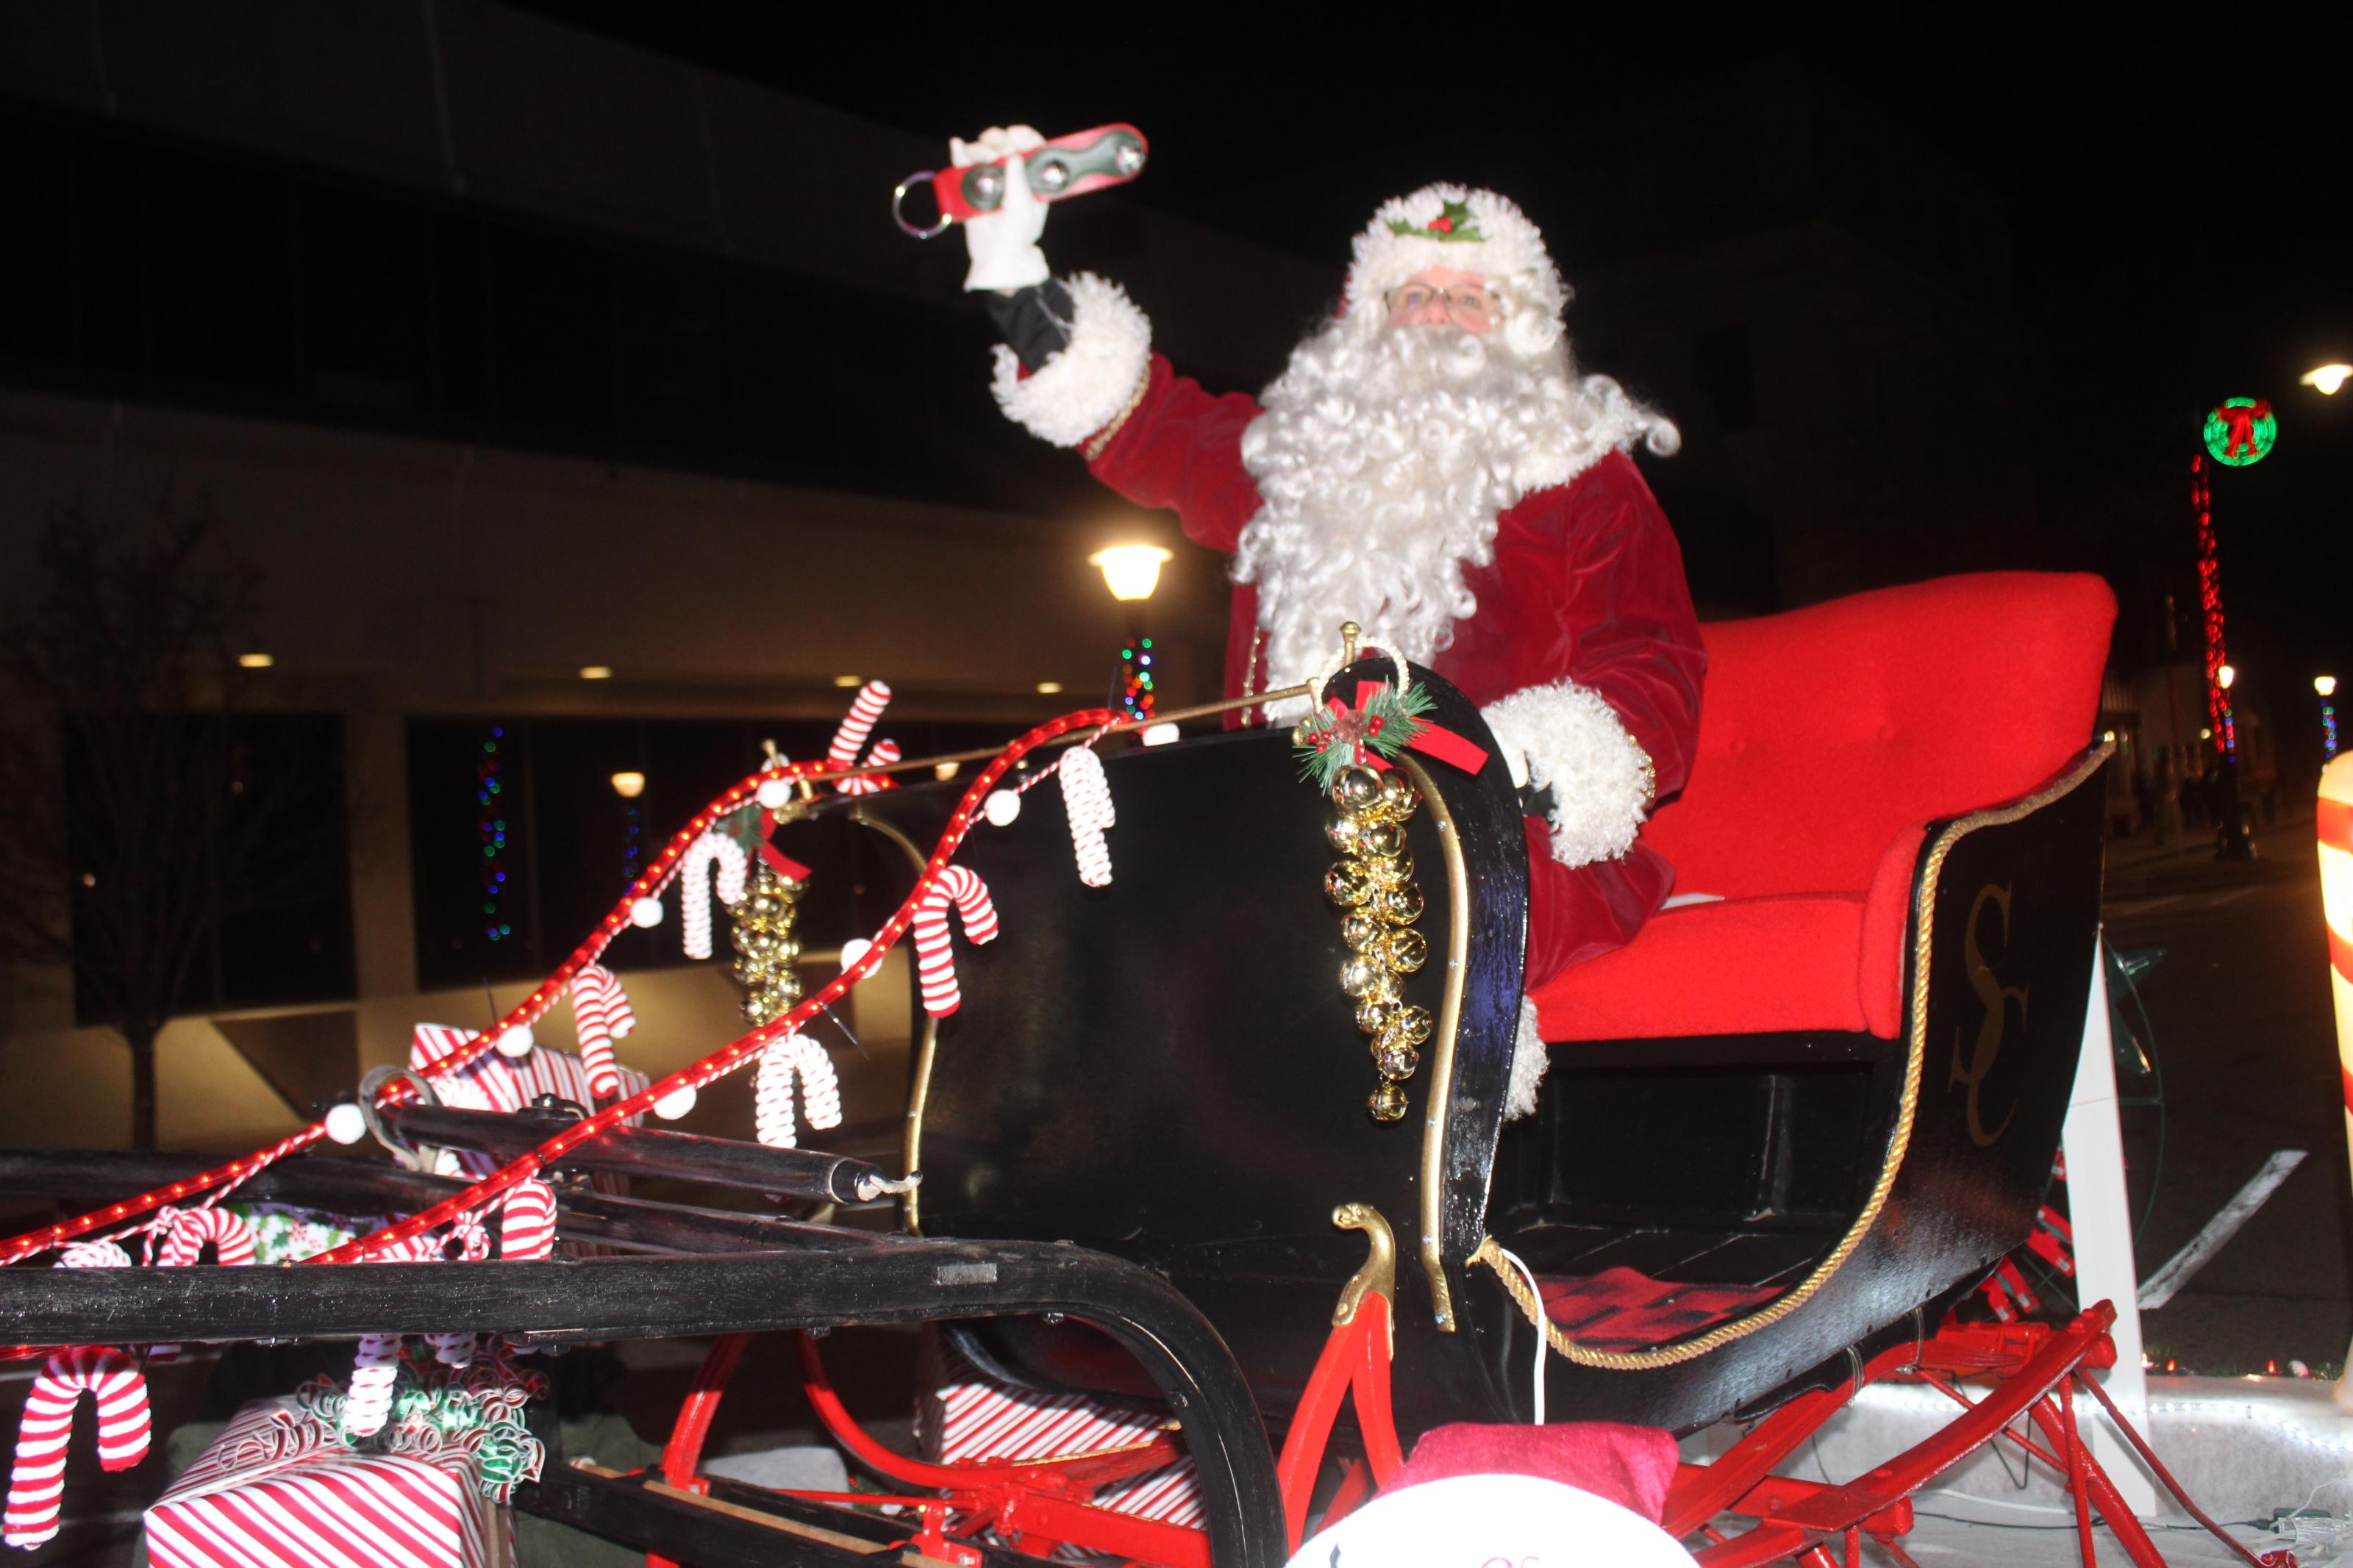   
																Santa Ditches Fire Truck for Sleigh in Parade 
															 